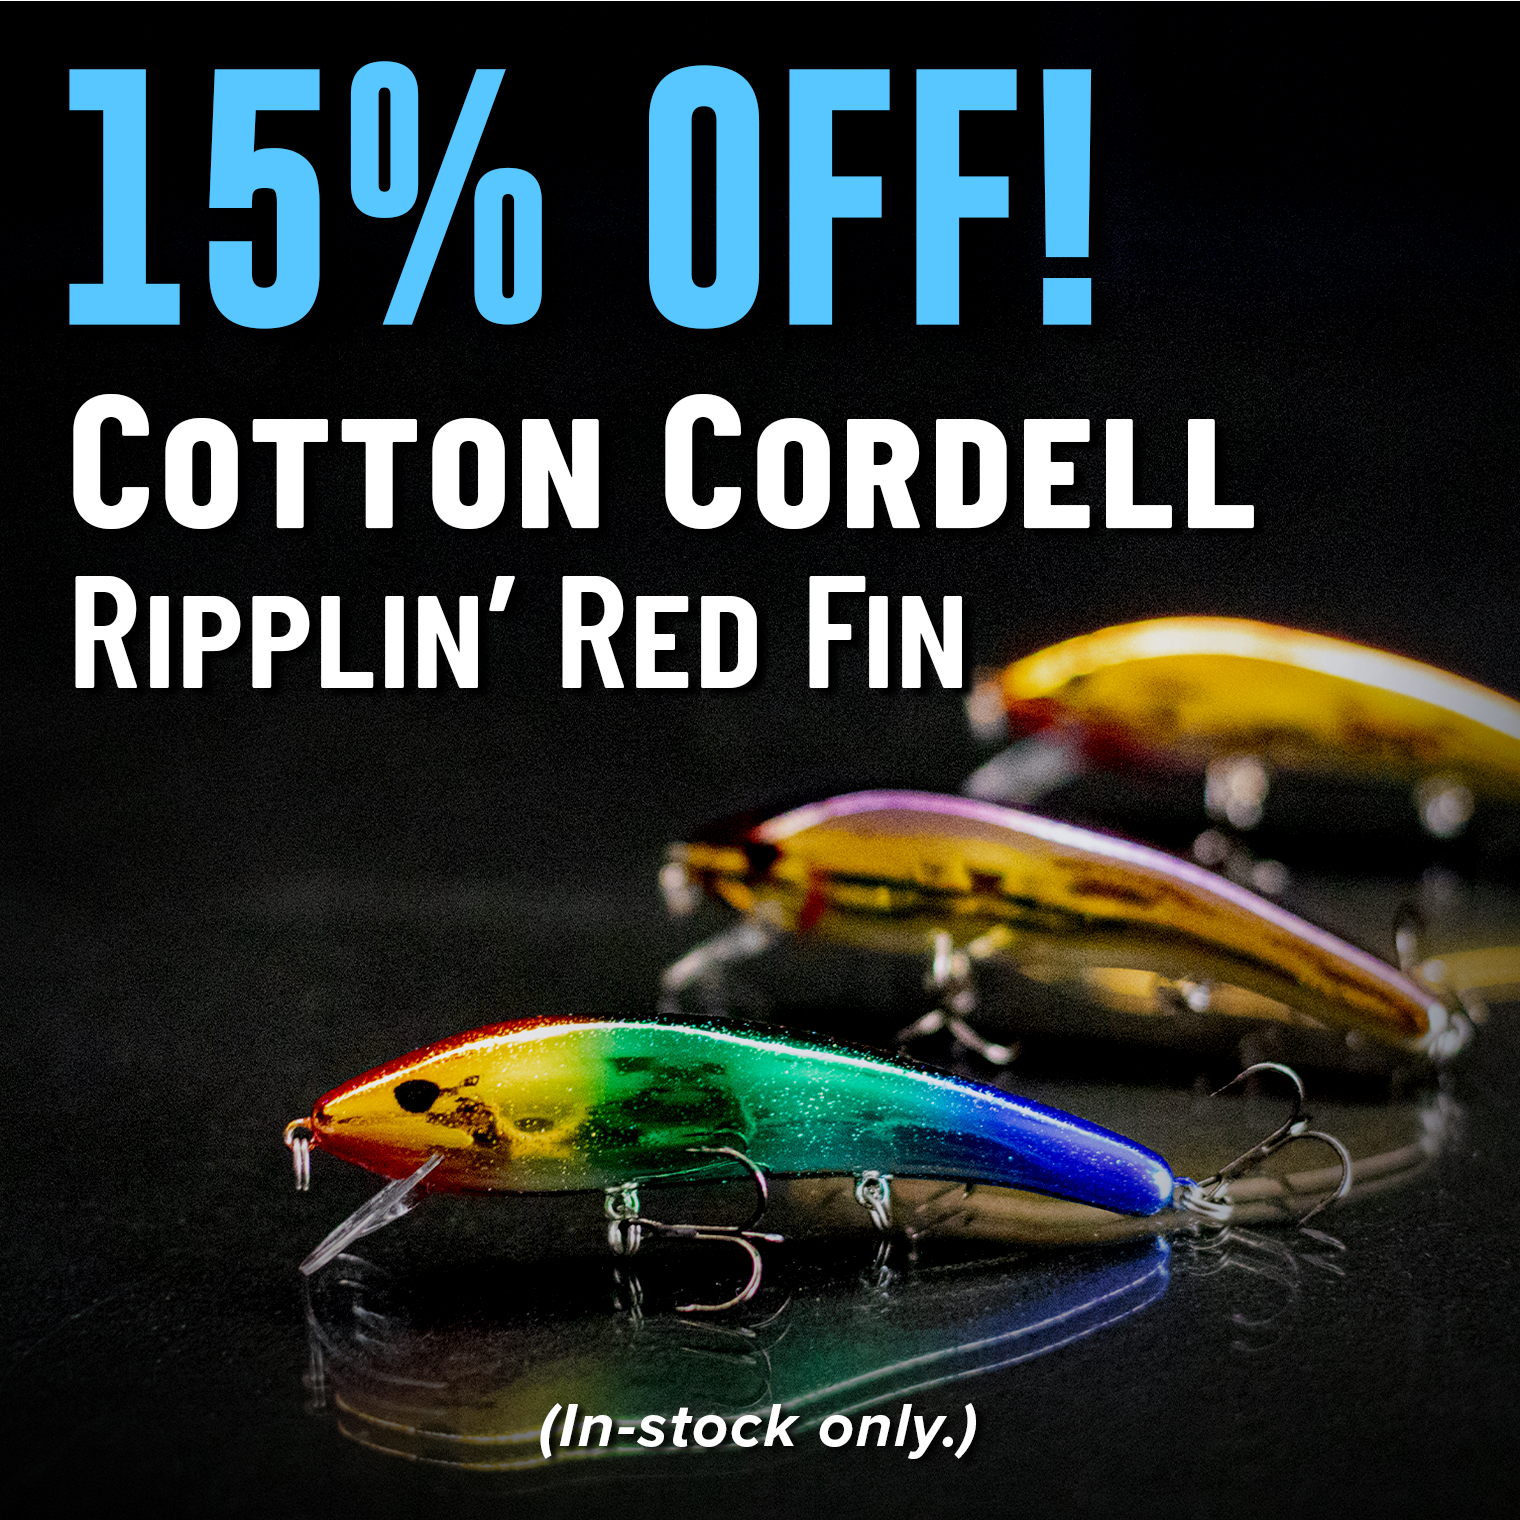 15% Off! Cotton Cordell Ripplin' Red Fin (In-stock only.)